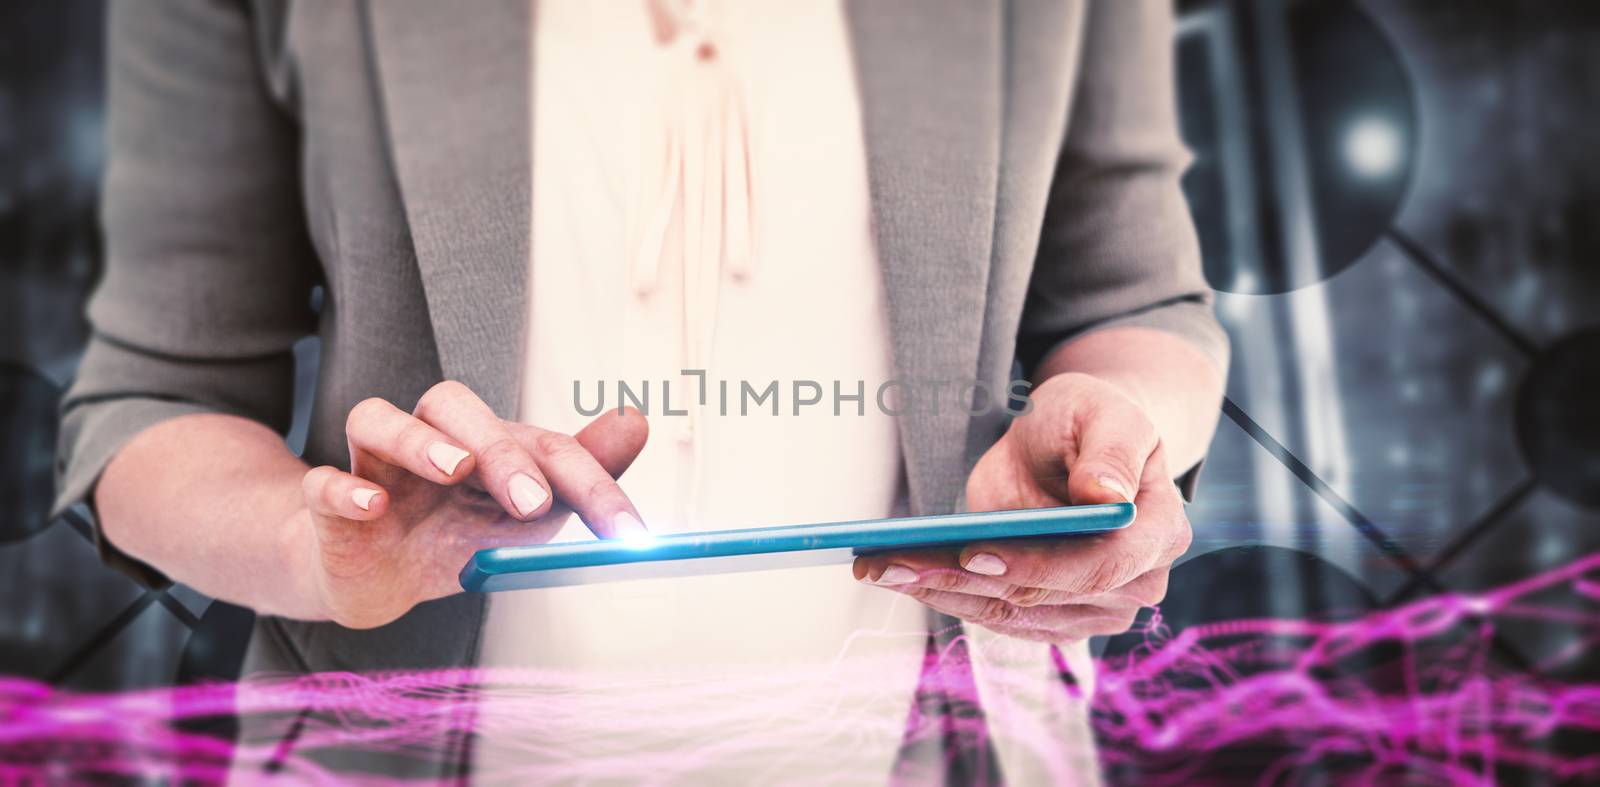 Close up of woman using tablet against abstract shiny black background